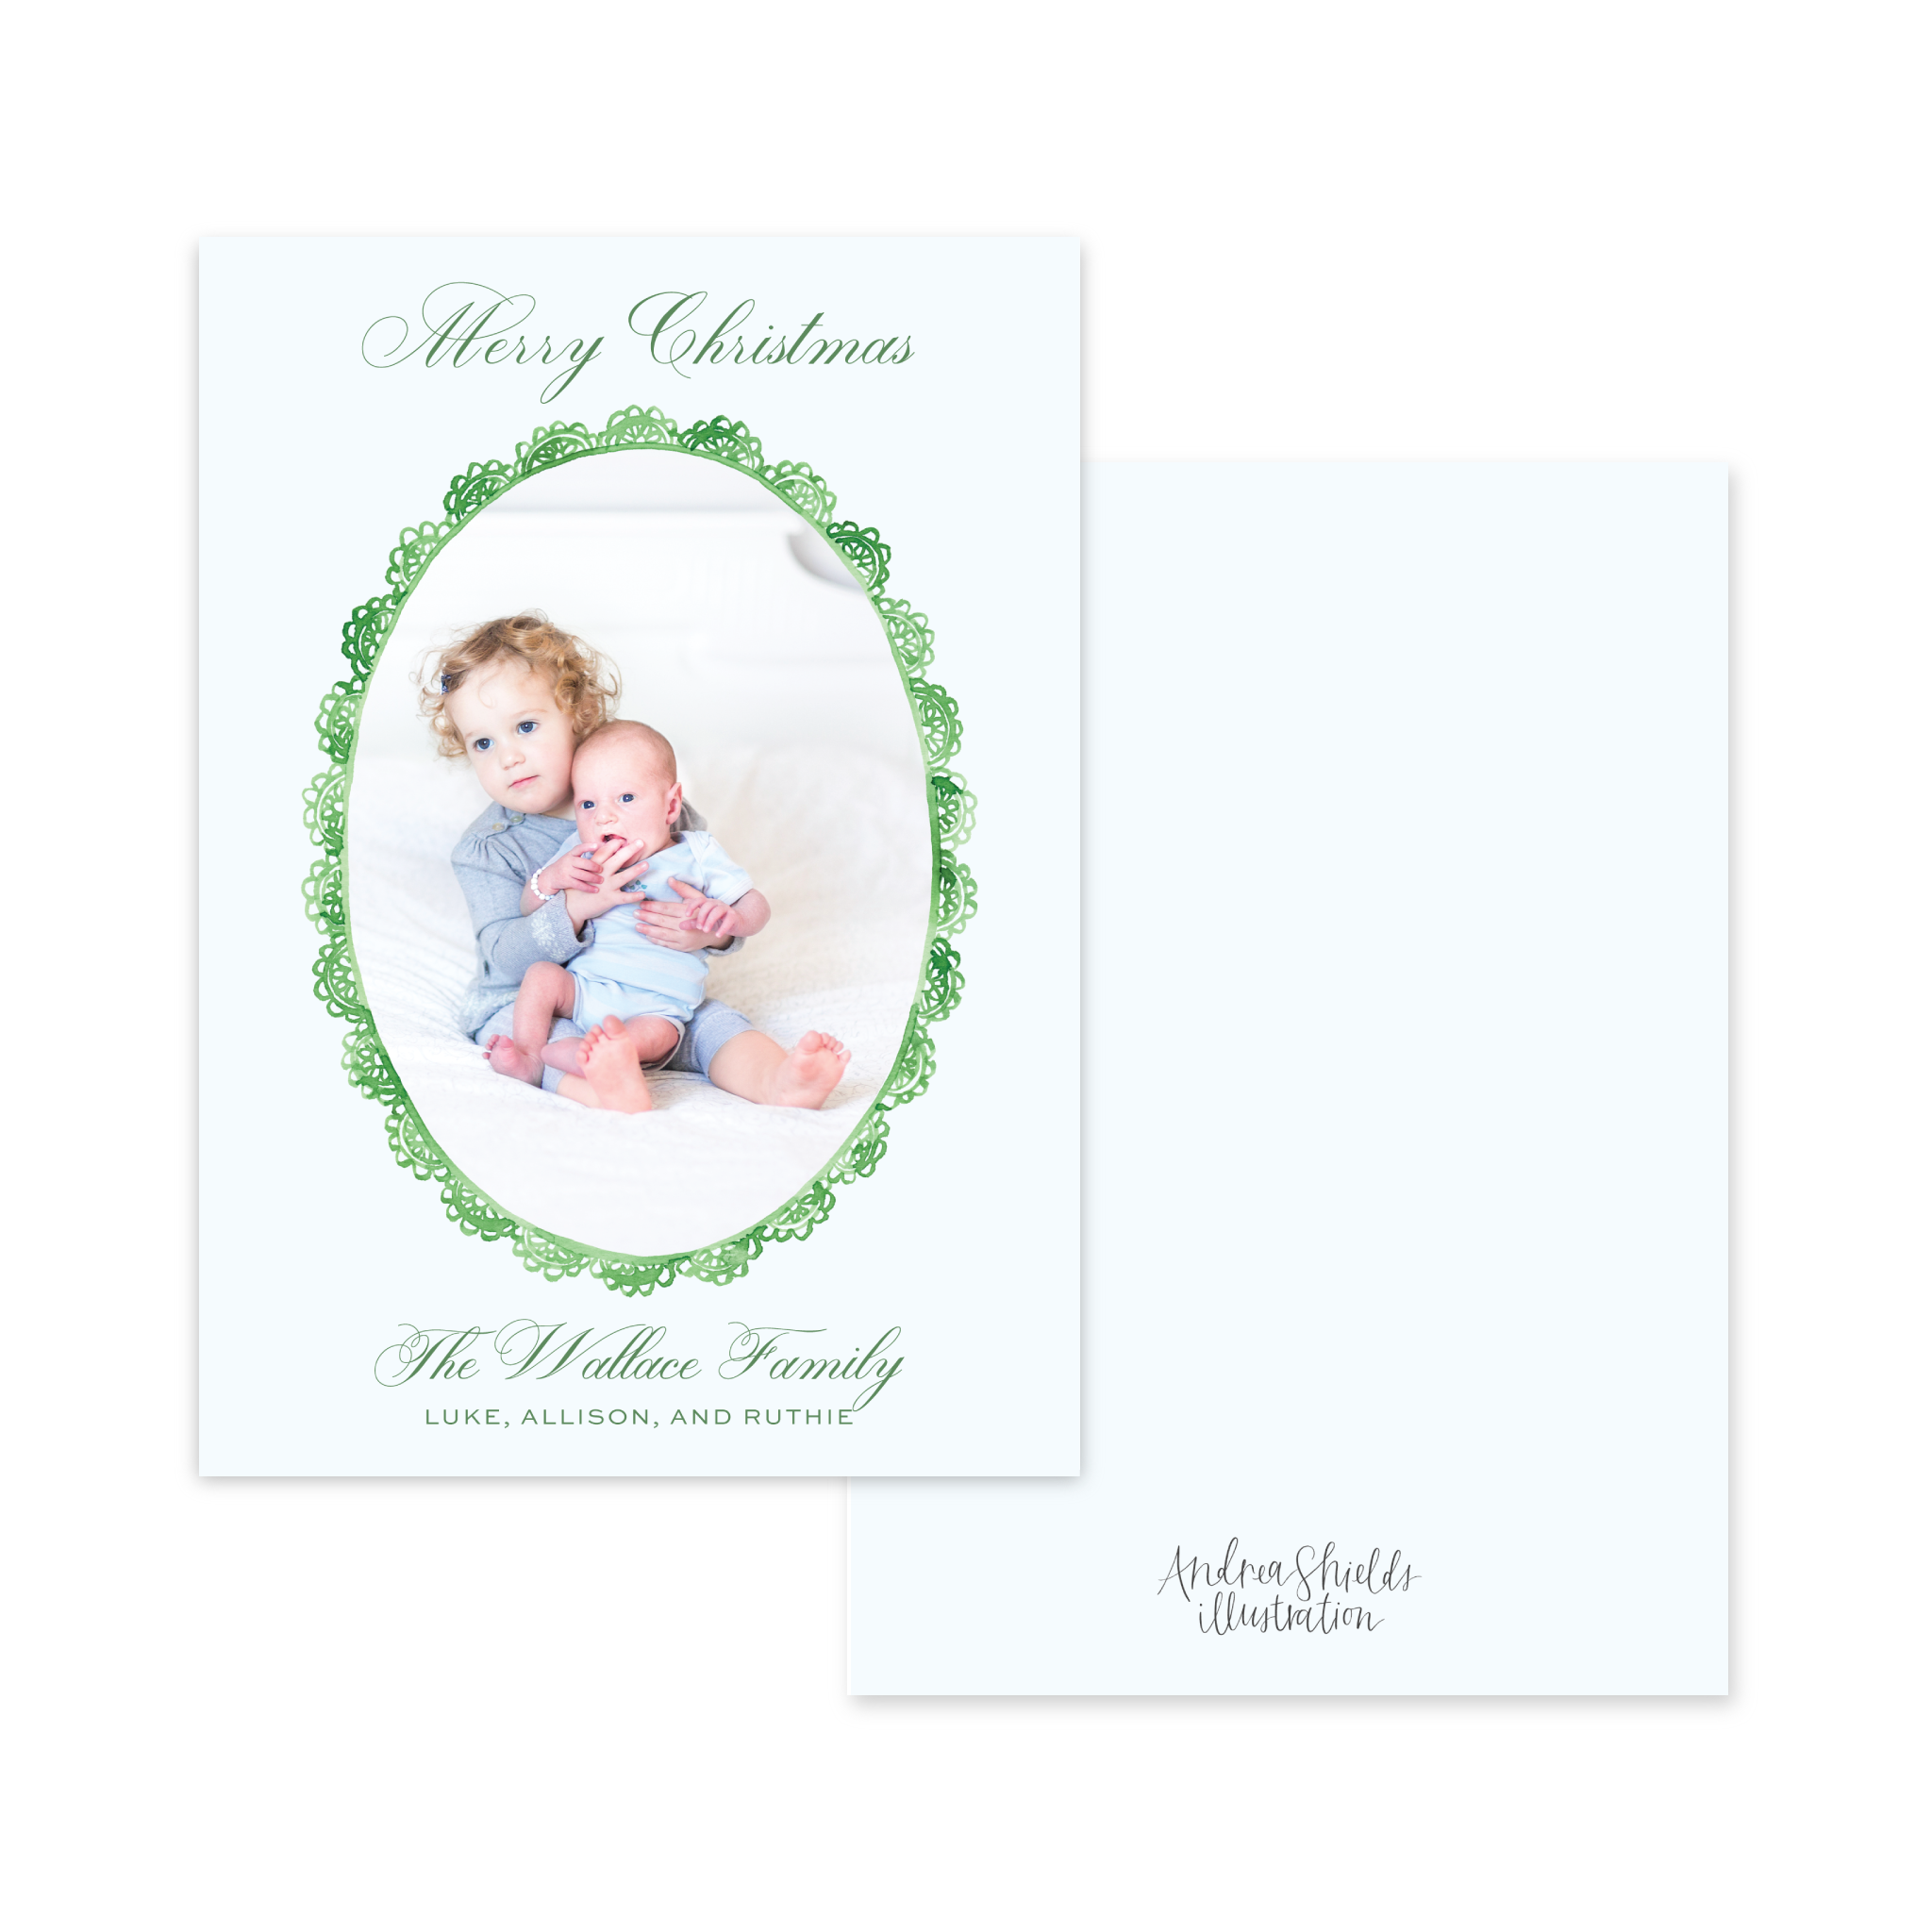 Green Lace Vertical | Holiday Photo Card